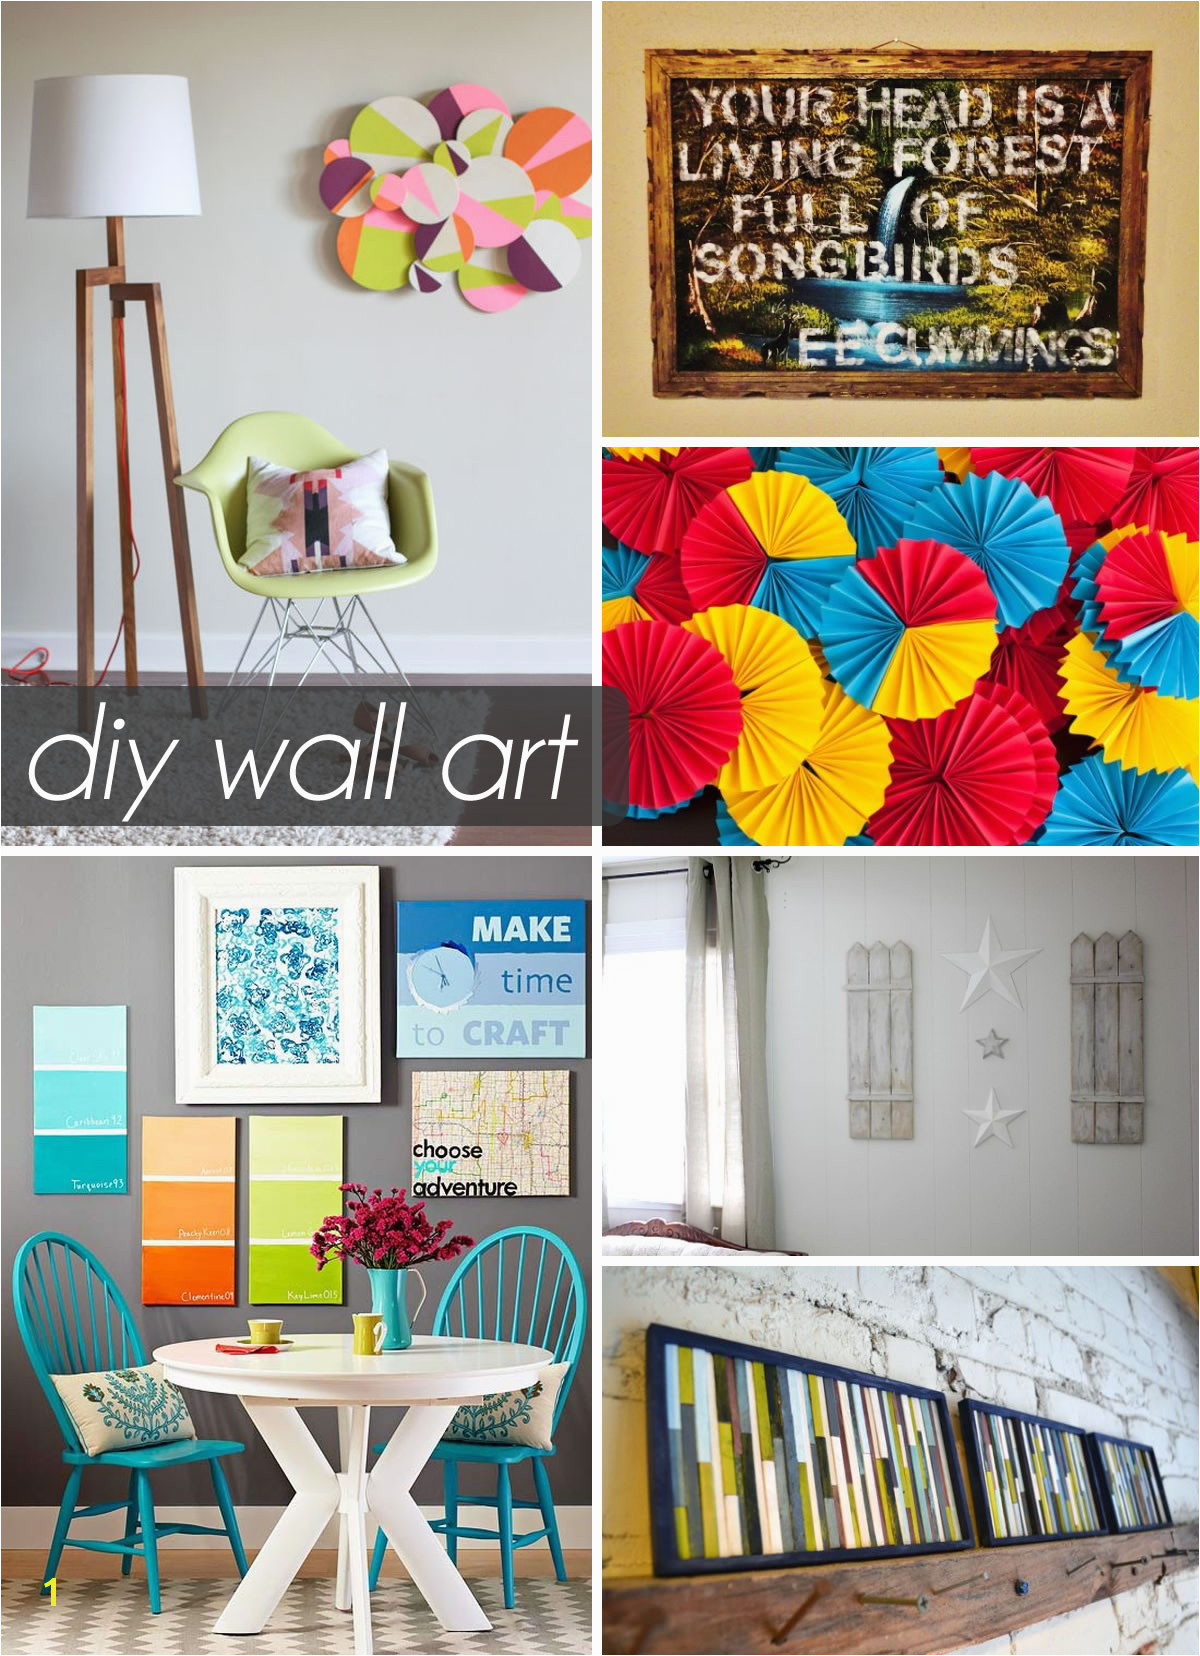 Easy Wall Murals to Paint 50 Beautiful Diy Wall Art Ideas for Your Home